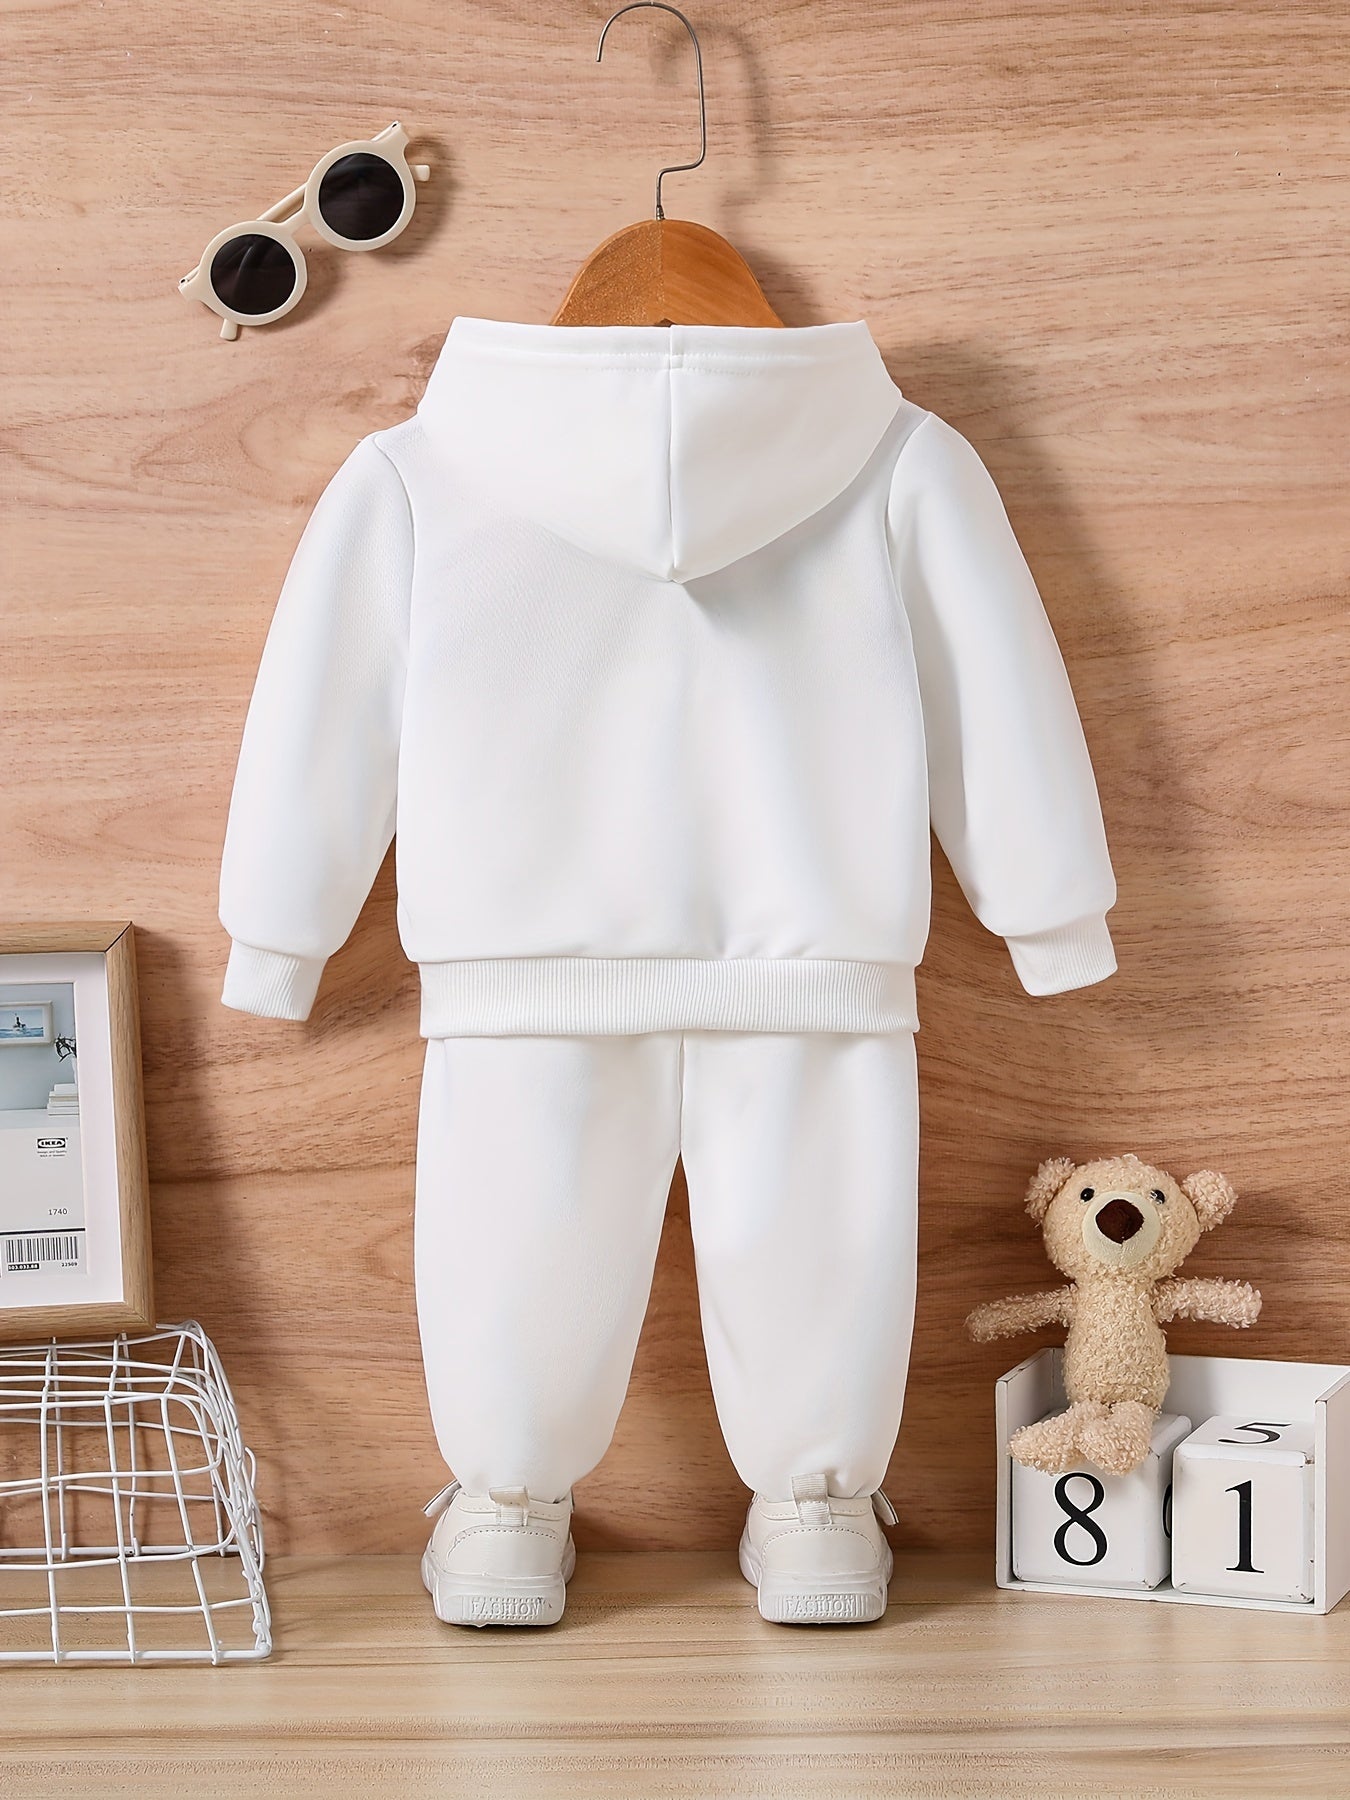 MAMA'S BOY Print Casual Outfit, Infant Baby Autumn And Winter Sweatshirt Hoodie Trousers Set